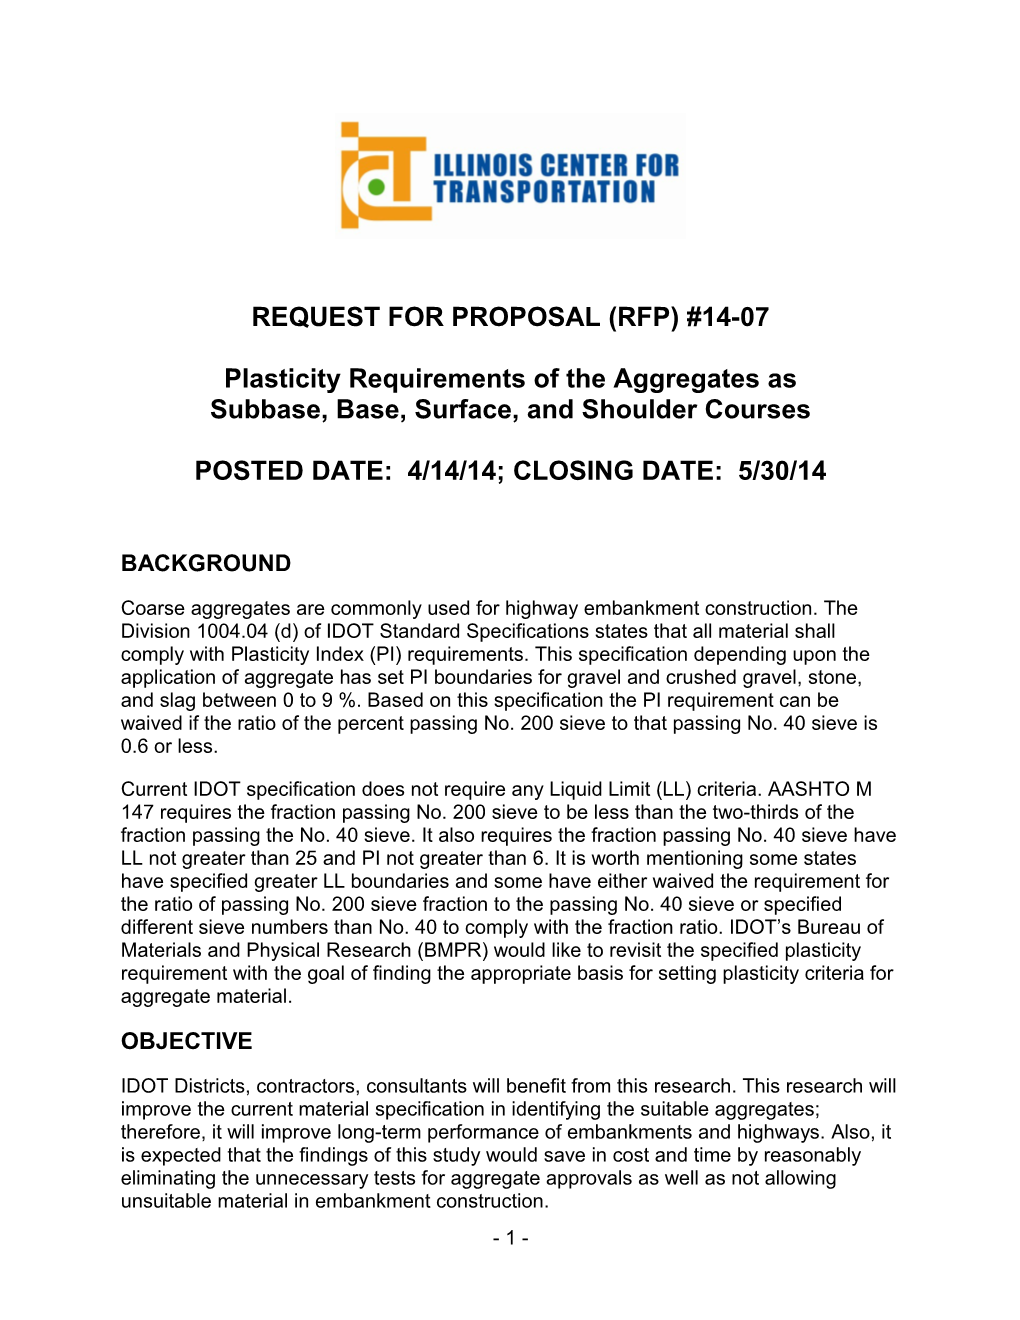 Request for Proposal (Rfp) #14-07